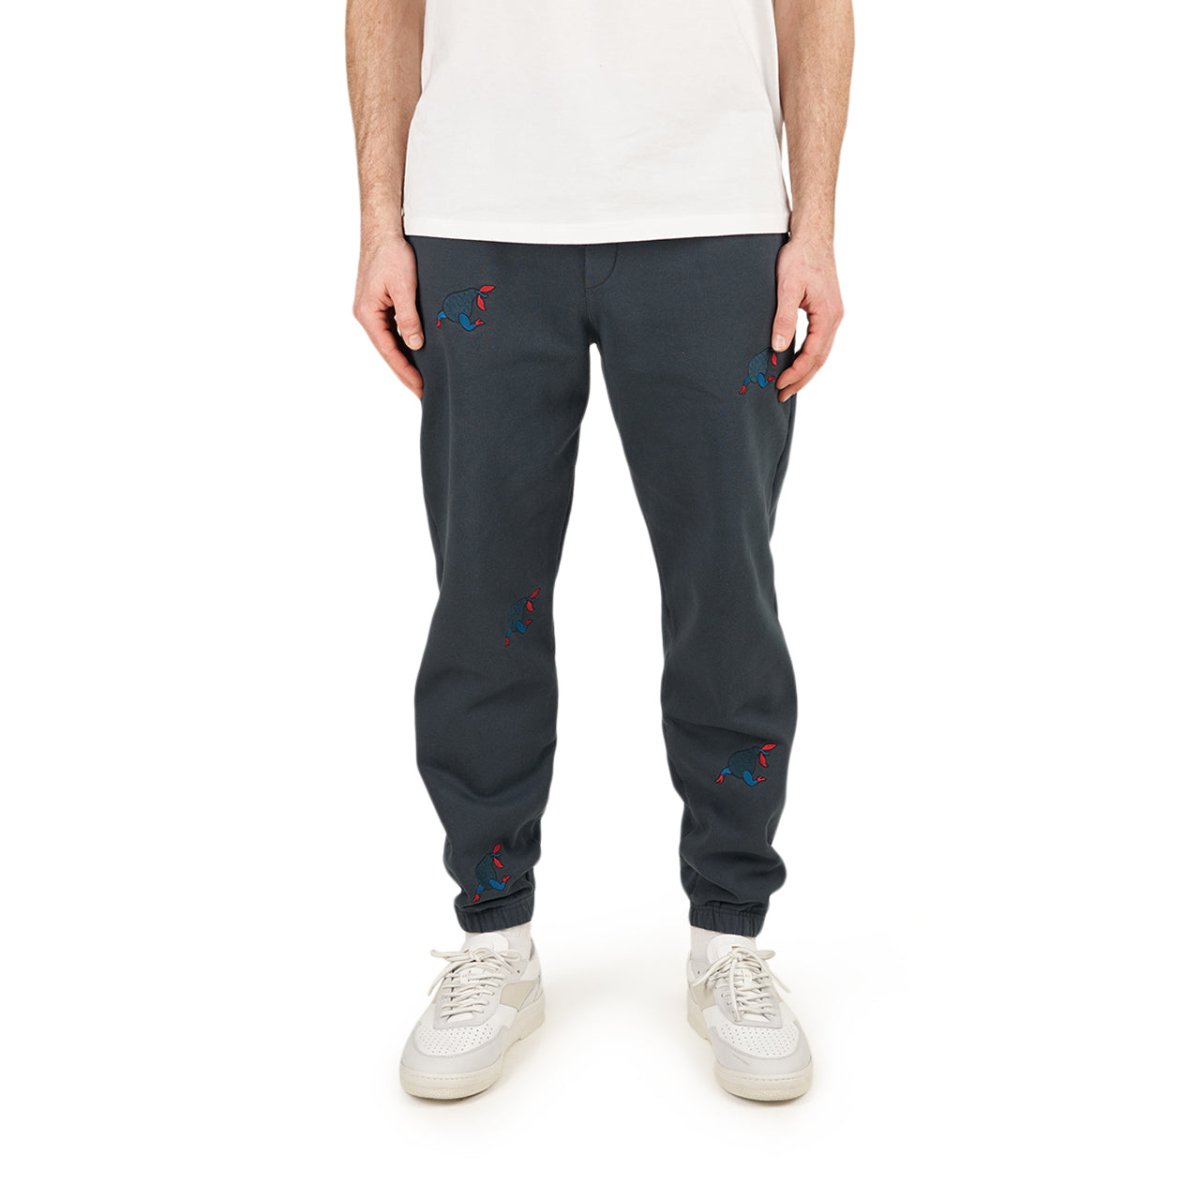 Image of Parra Running Pear Sweat Pants (Navy)